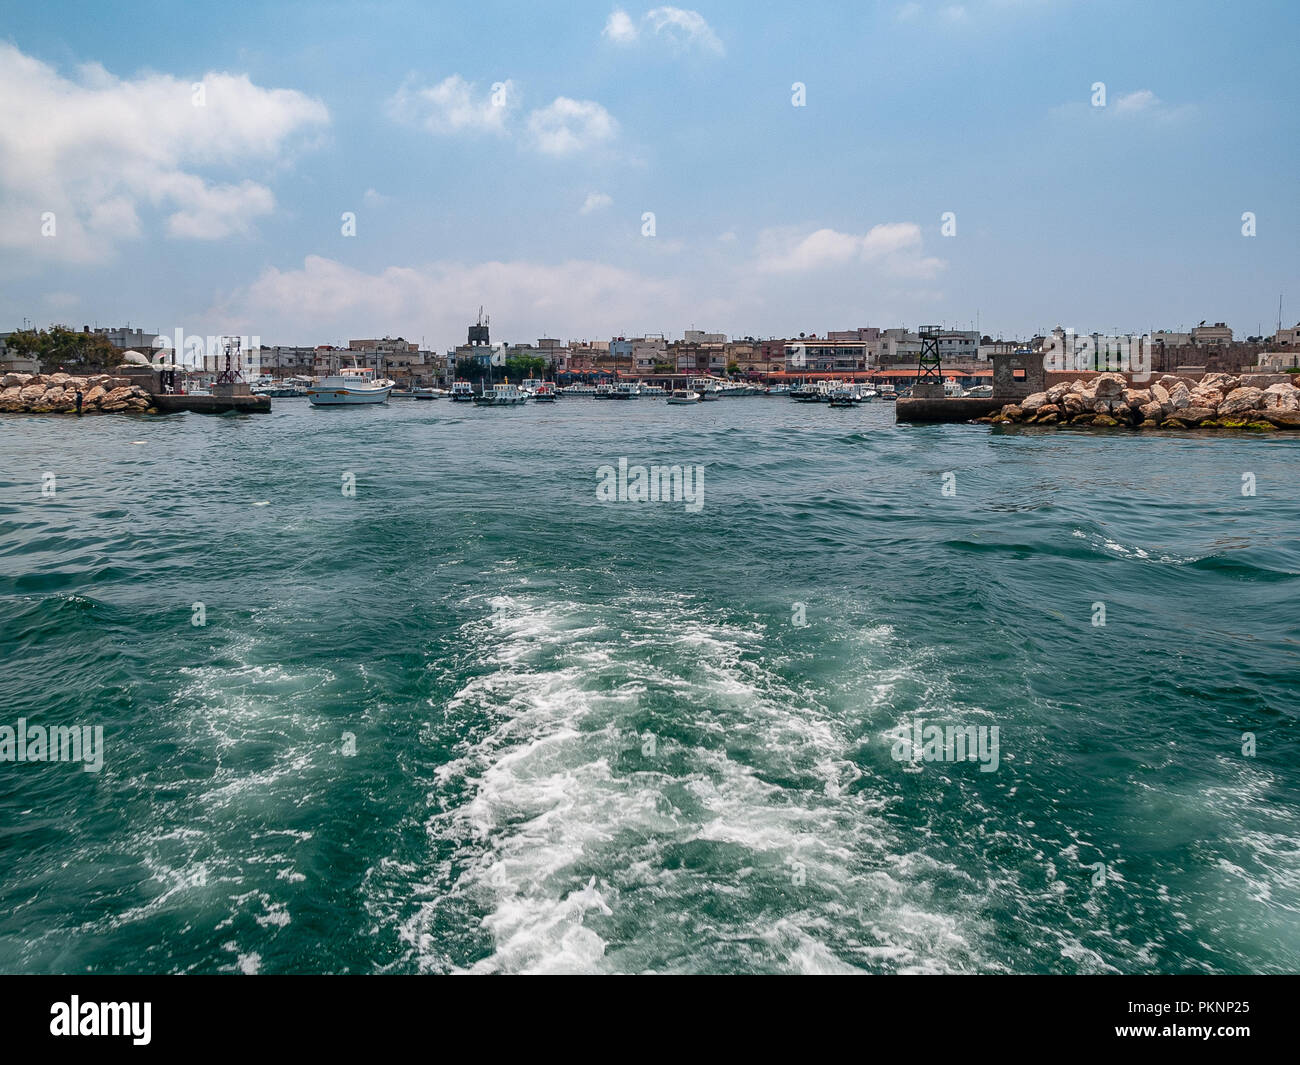 Arwad (Arados) is the only inhabited island in Syria. It is located in the Mediterranean Sea 3 km from Tartus. The town covers the entire island. Stock Photo